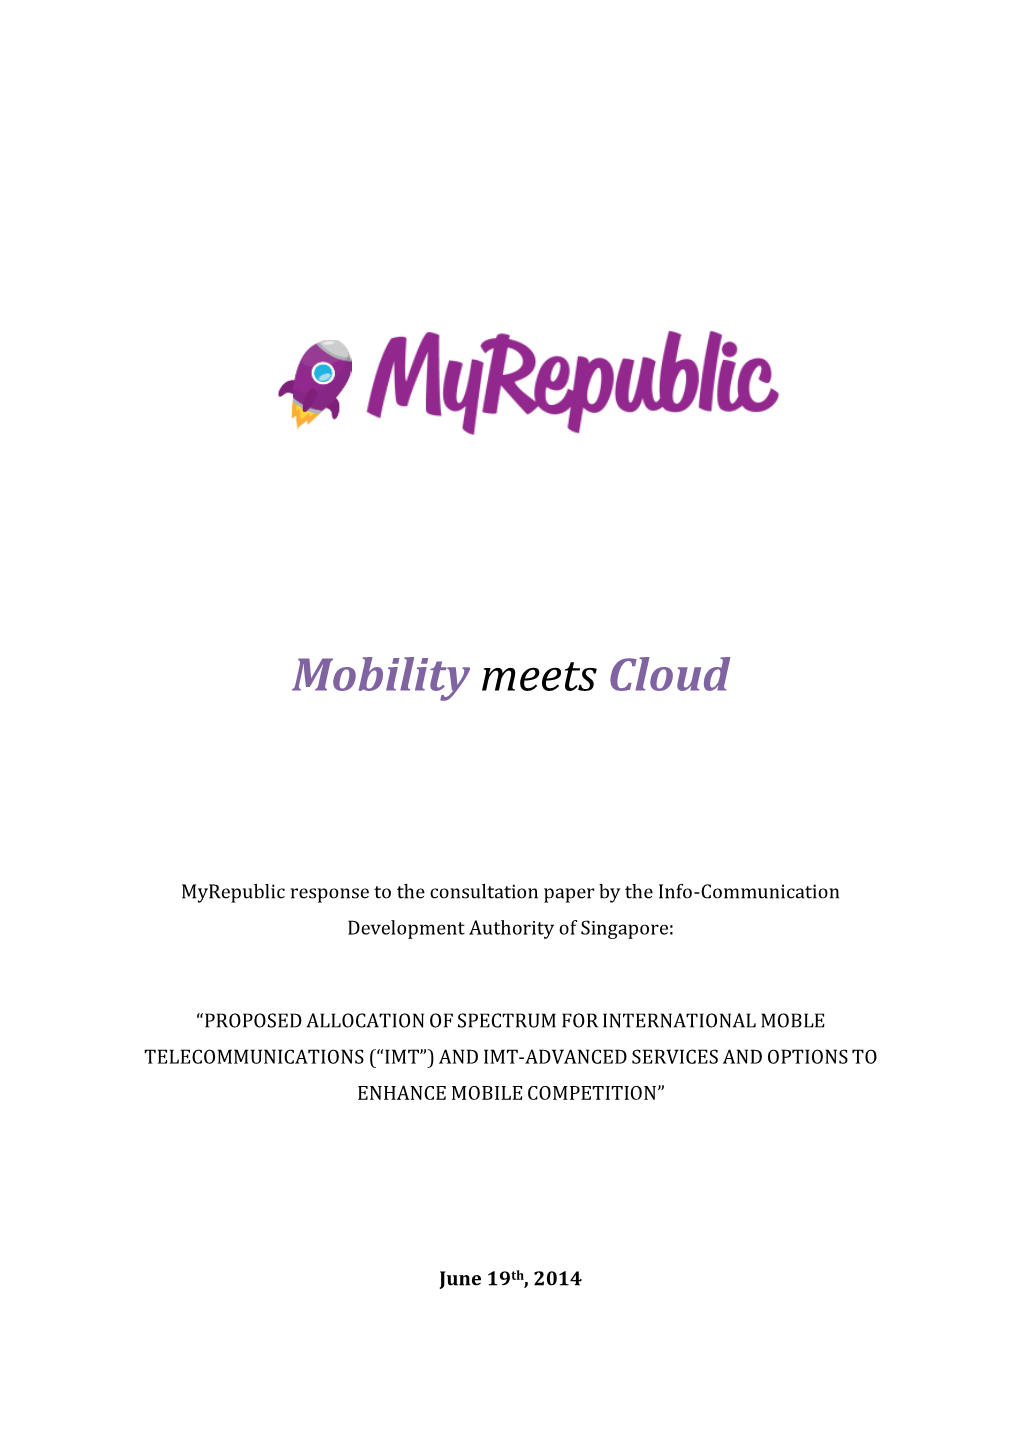 Myrepublic Response to the Consultation Paper by the Info-Communication Development Authority of Singapore